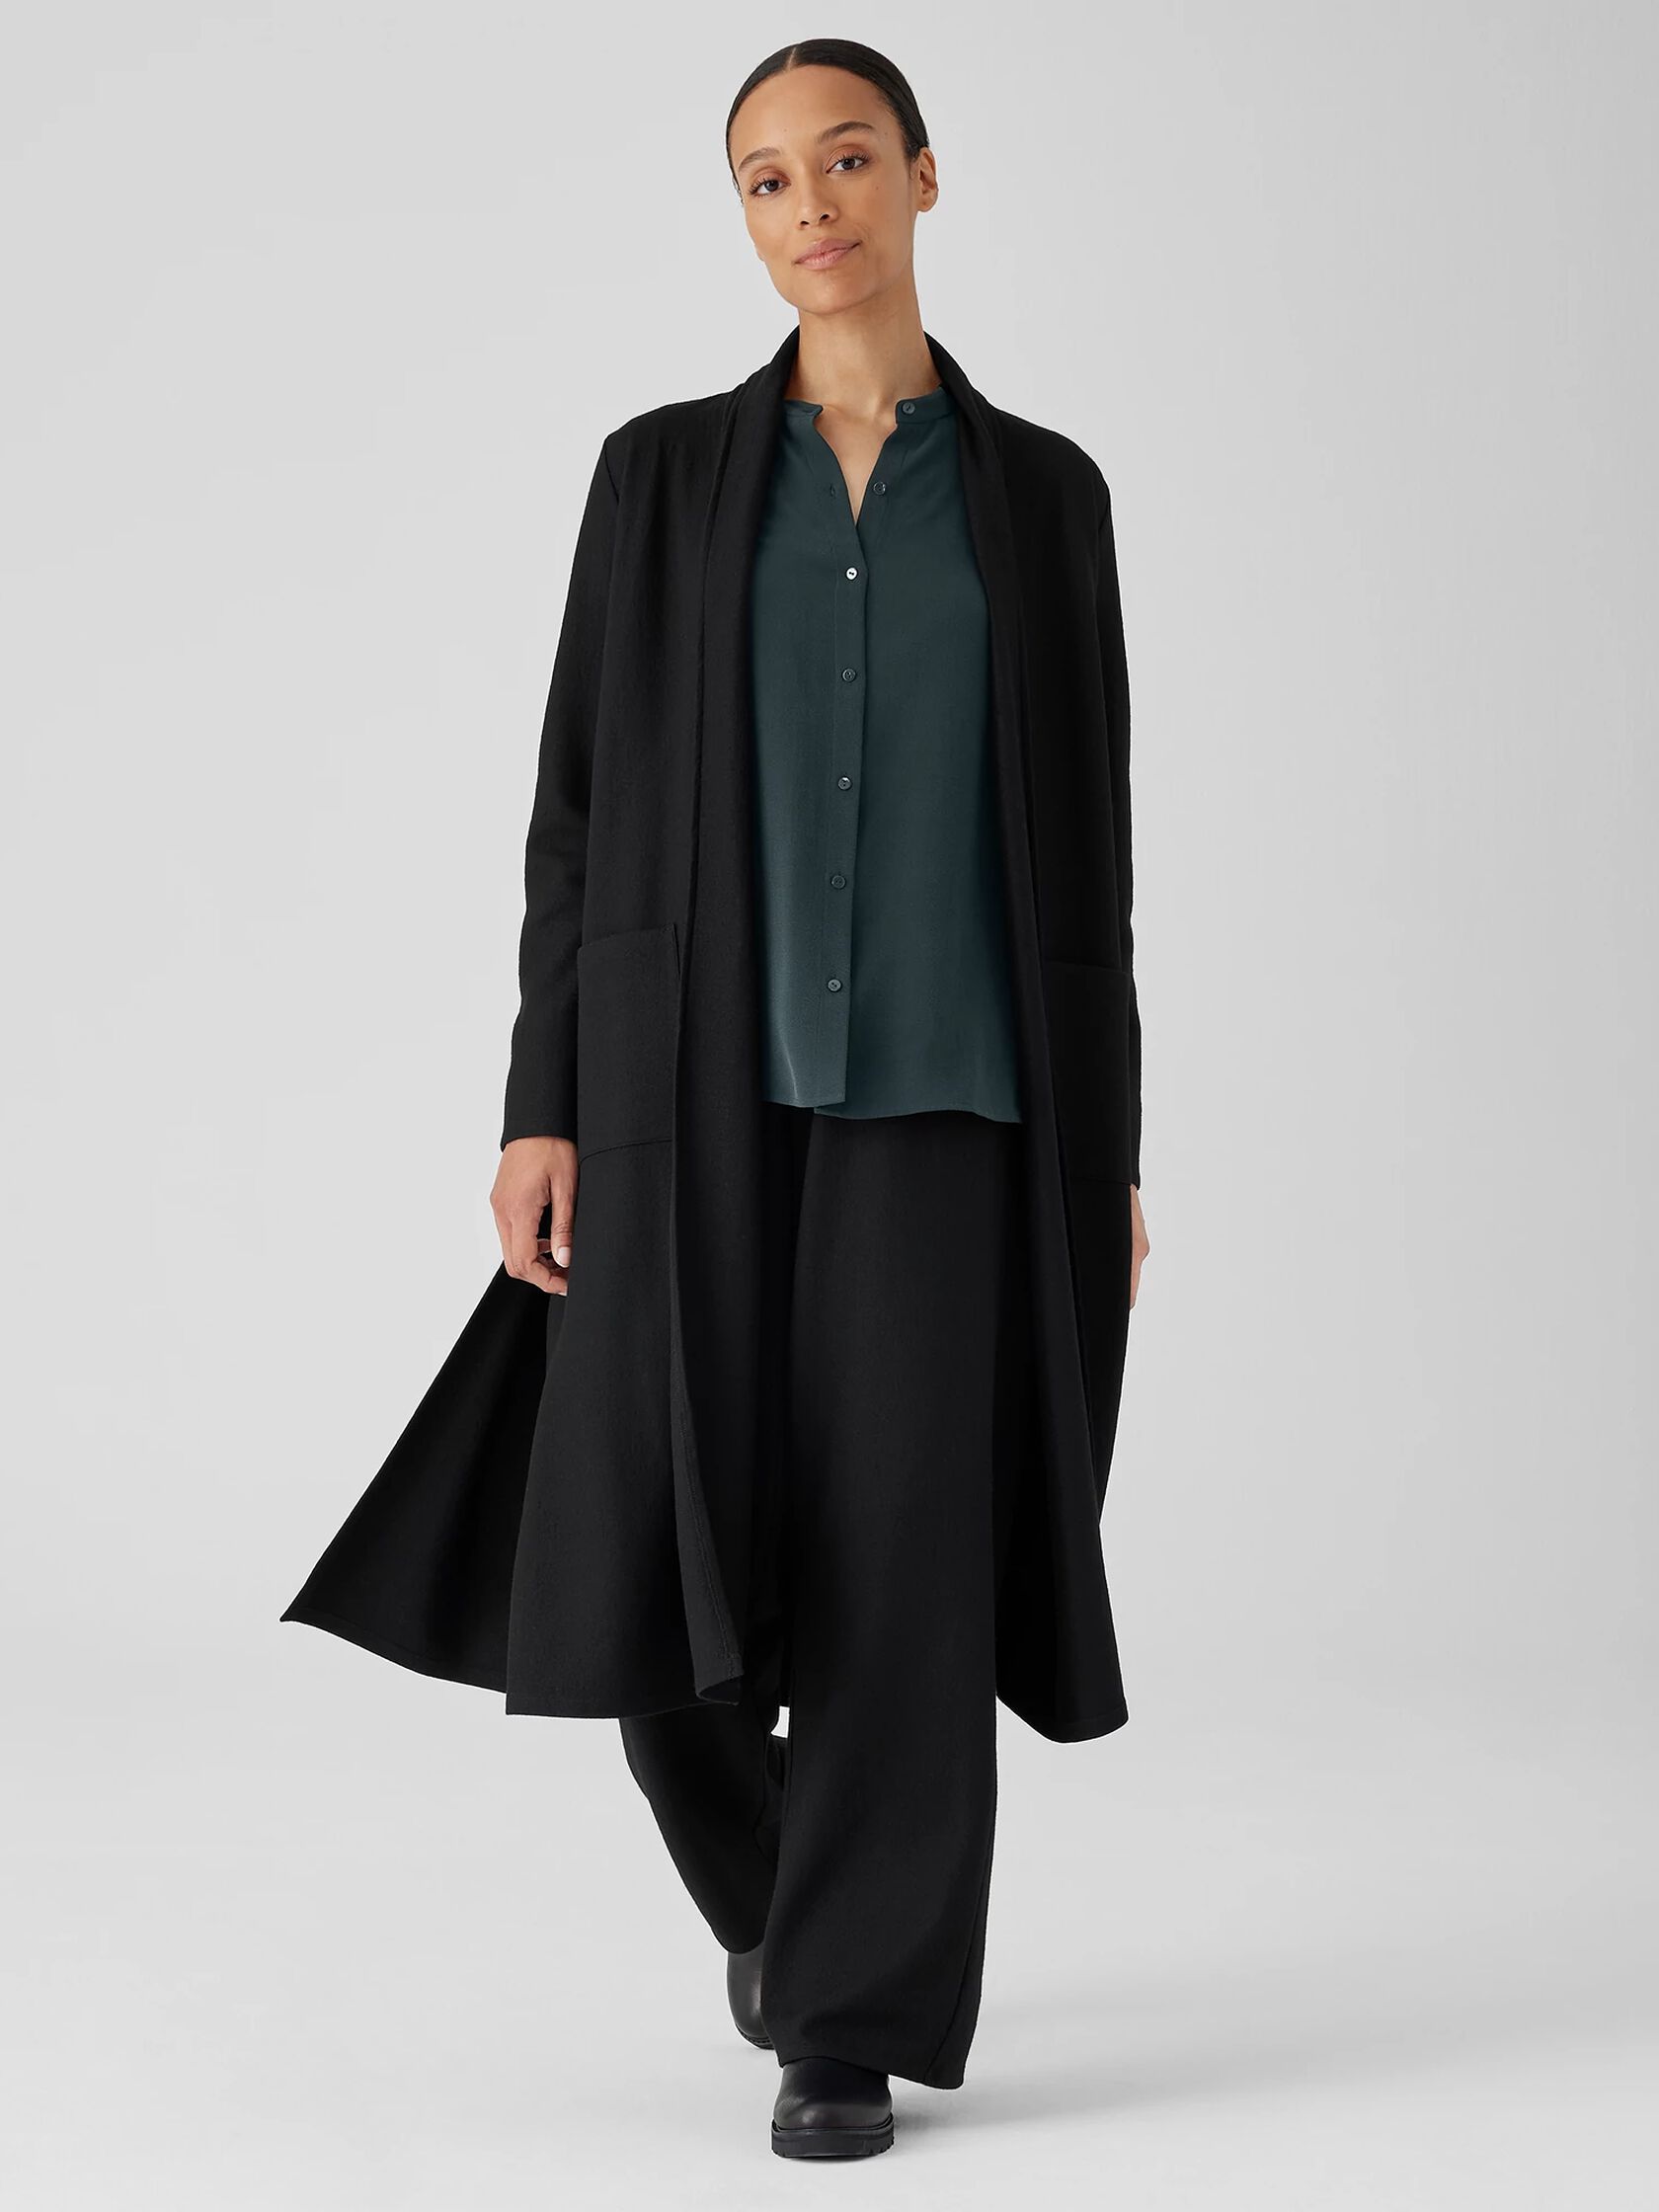 Eileen Fisher Eco Friendly Clothing